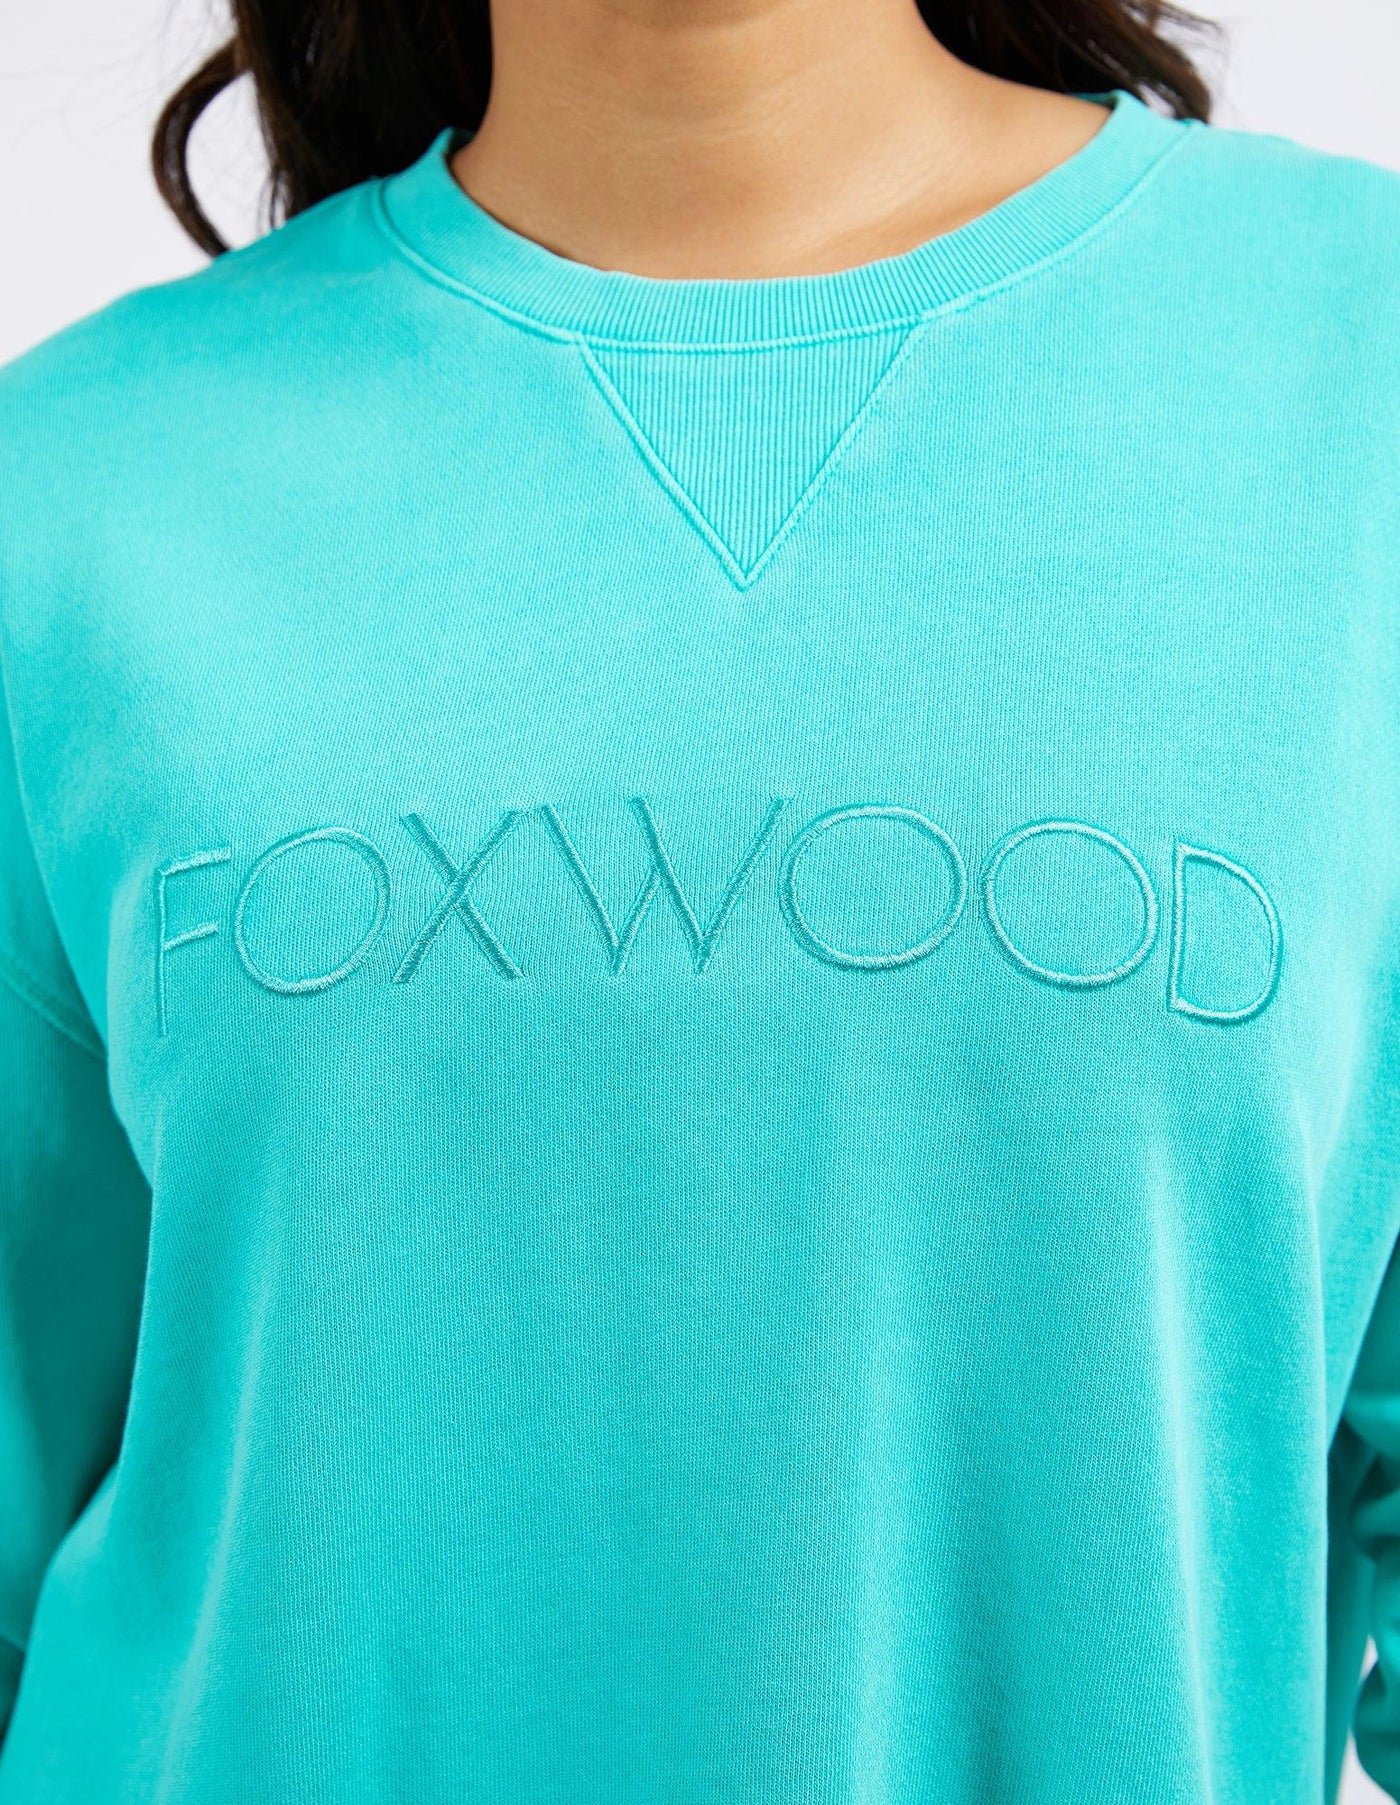 Simplified Crew - Teal-Foxwood-Lima & Co